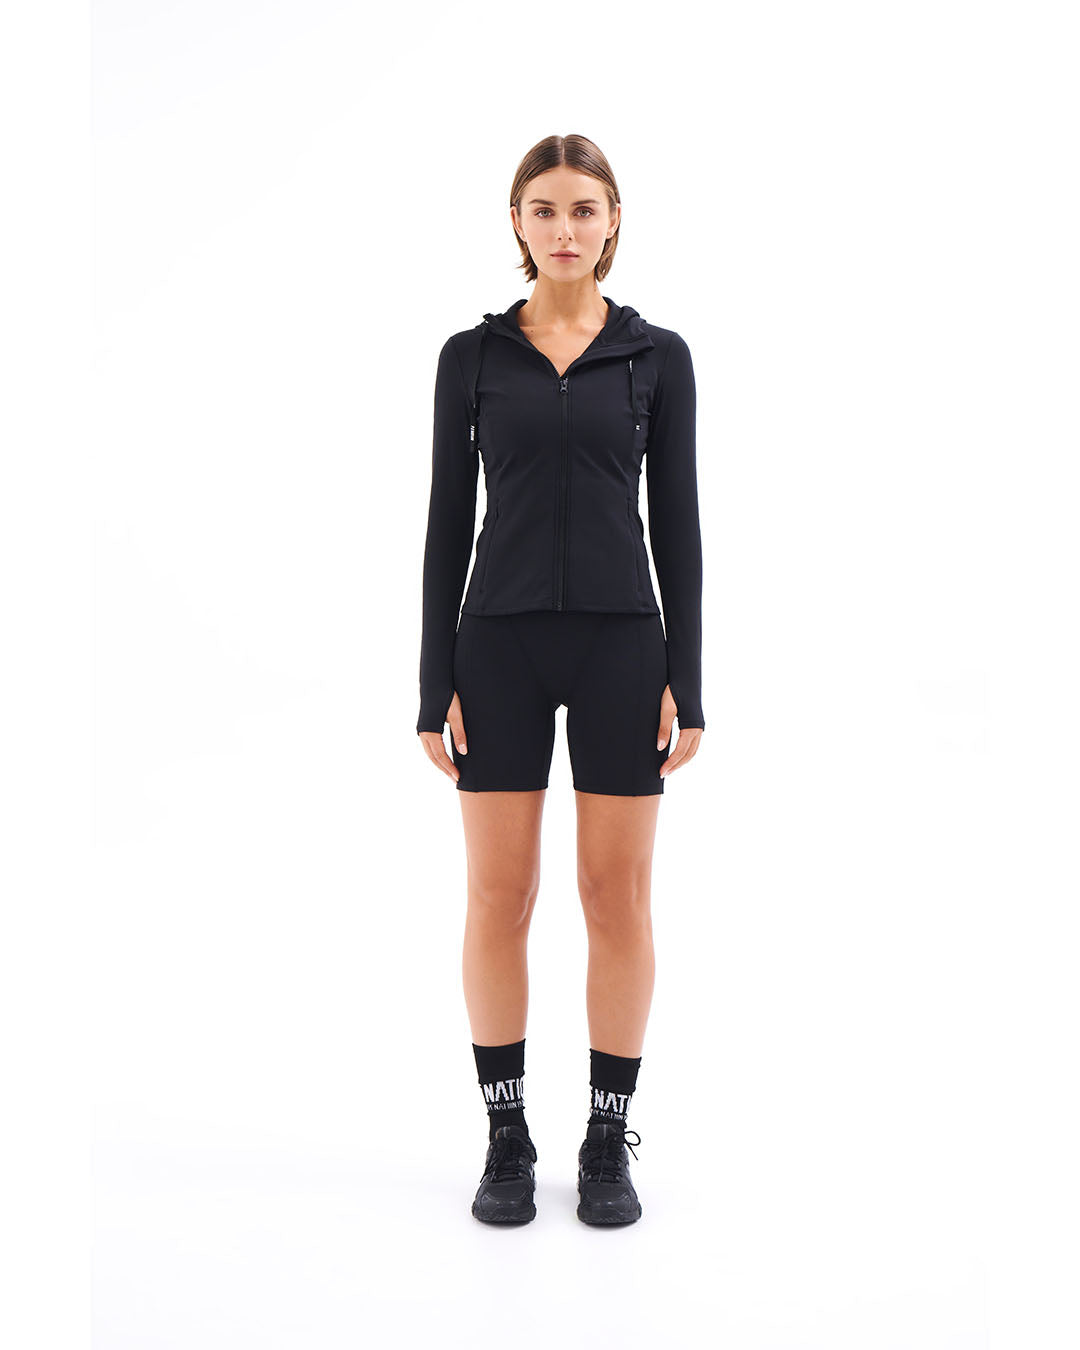 Agility Test Jacket in Black Jackets by PE Nation - Prae Store